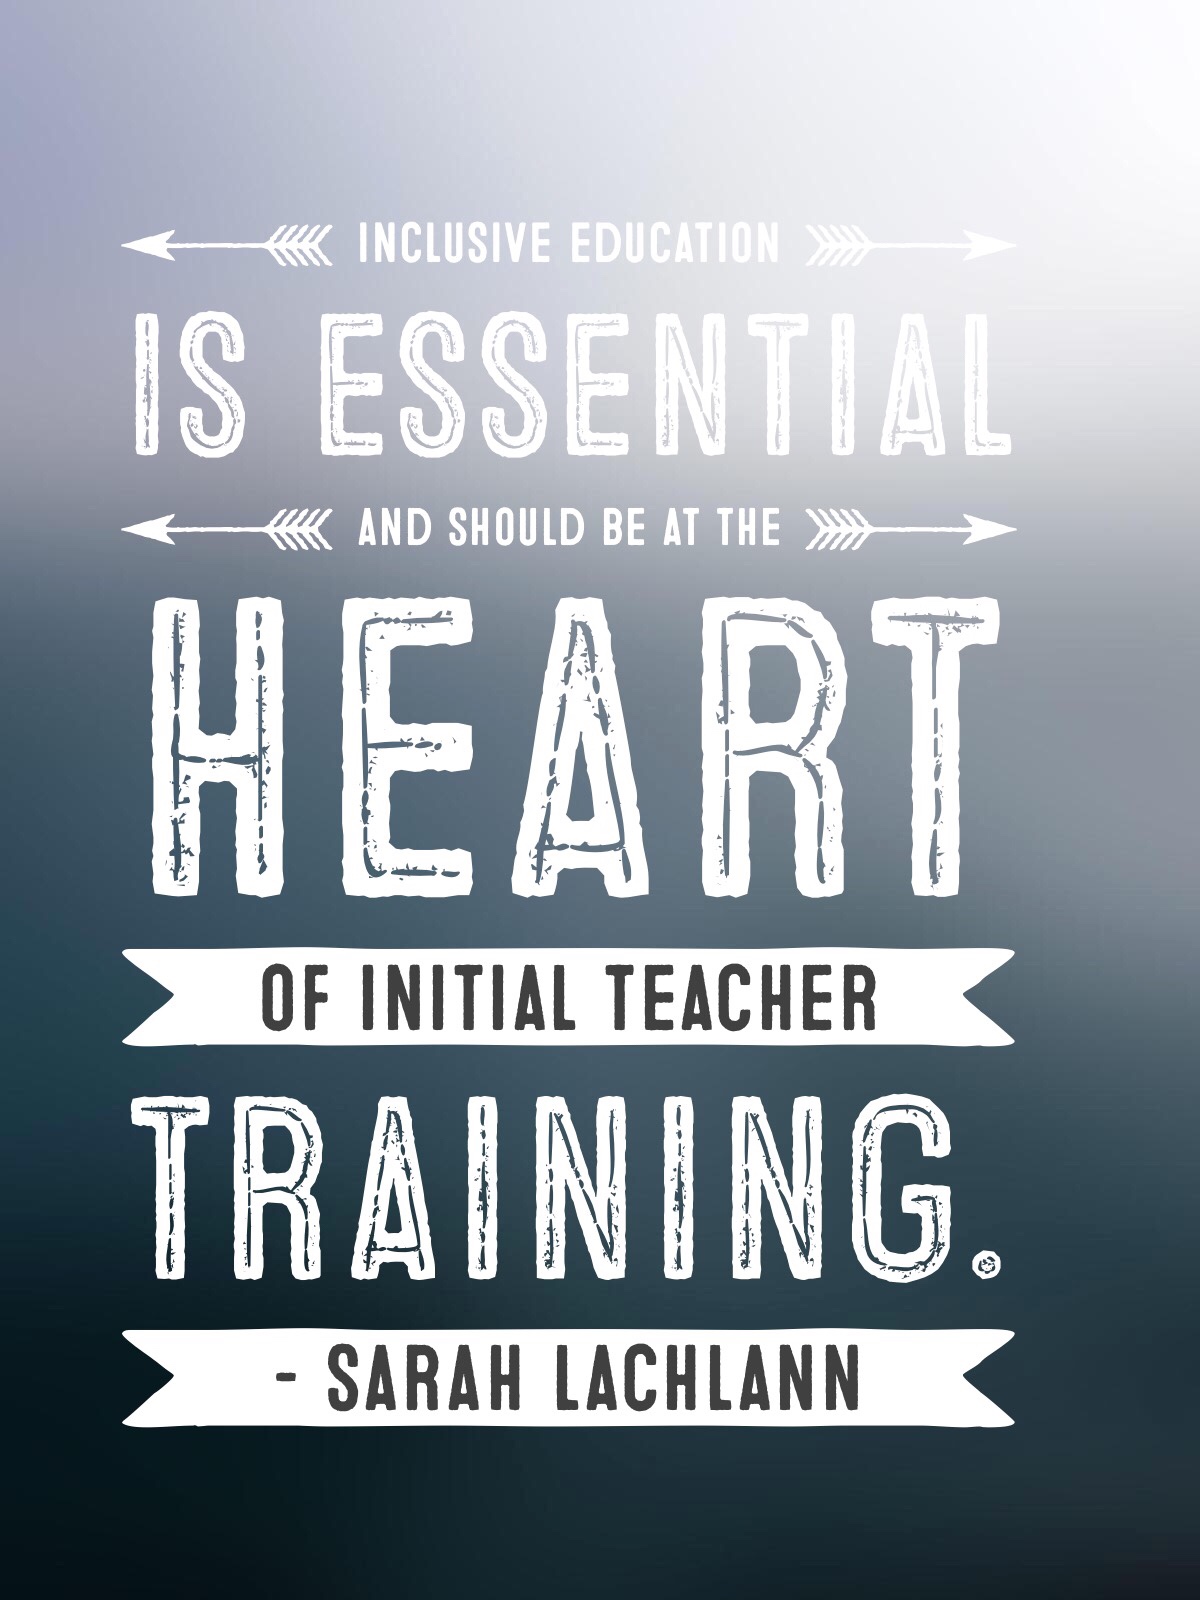 Inclusive education is essential and should be at the heart of initial teacher training. - Sarah Lachlann 